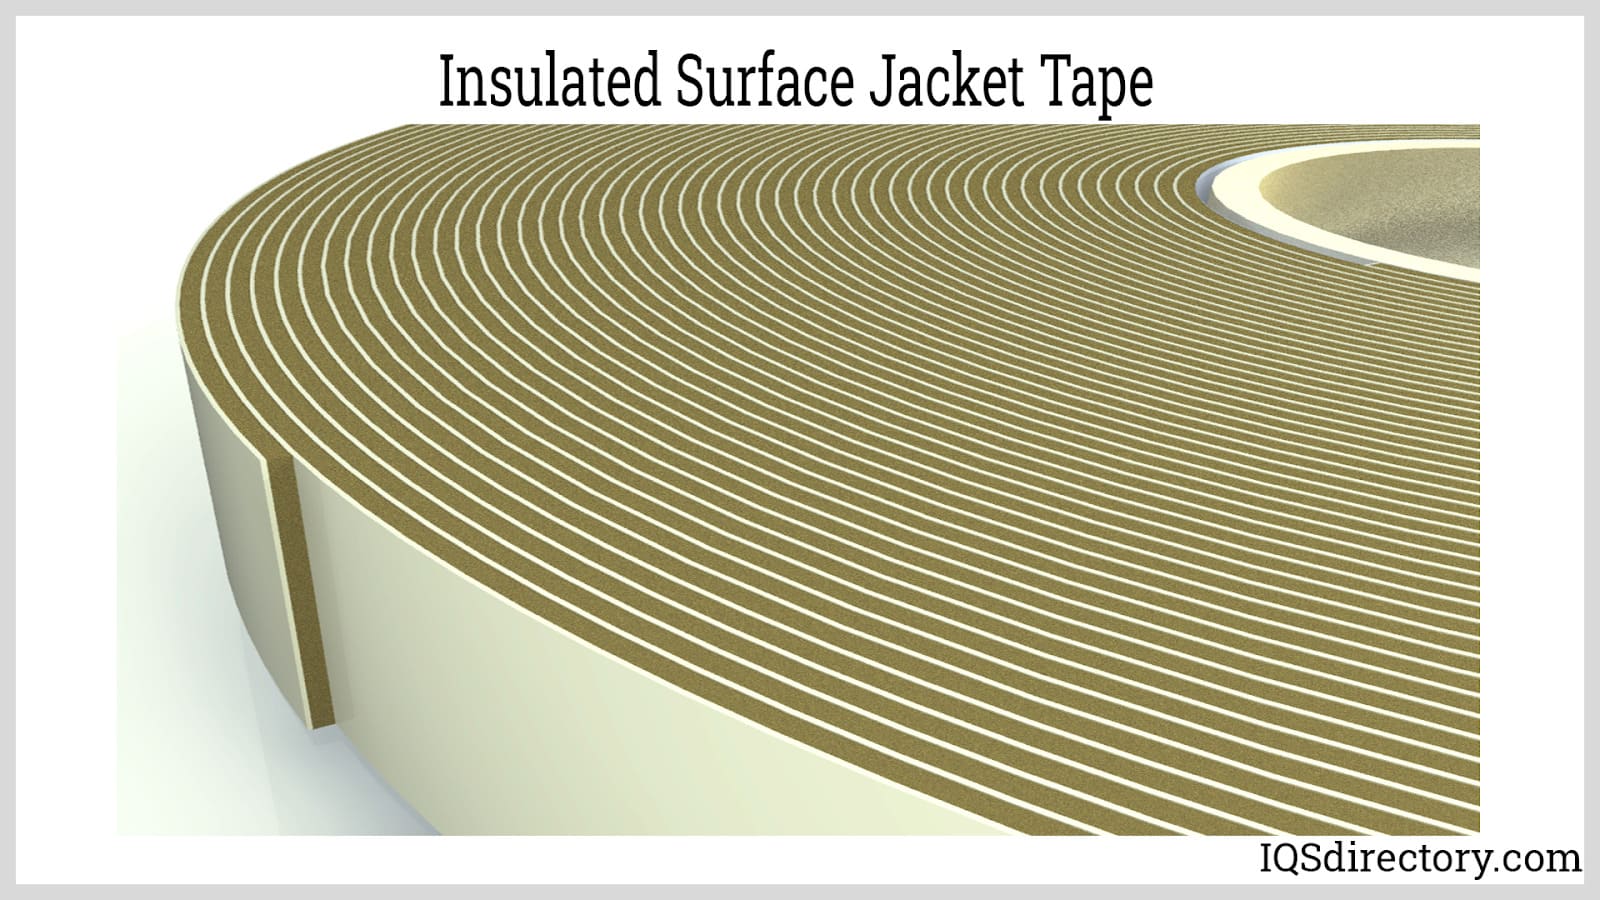 Insulated Surface Jacket Tape